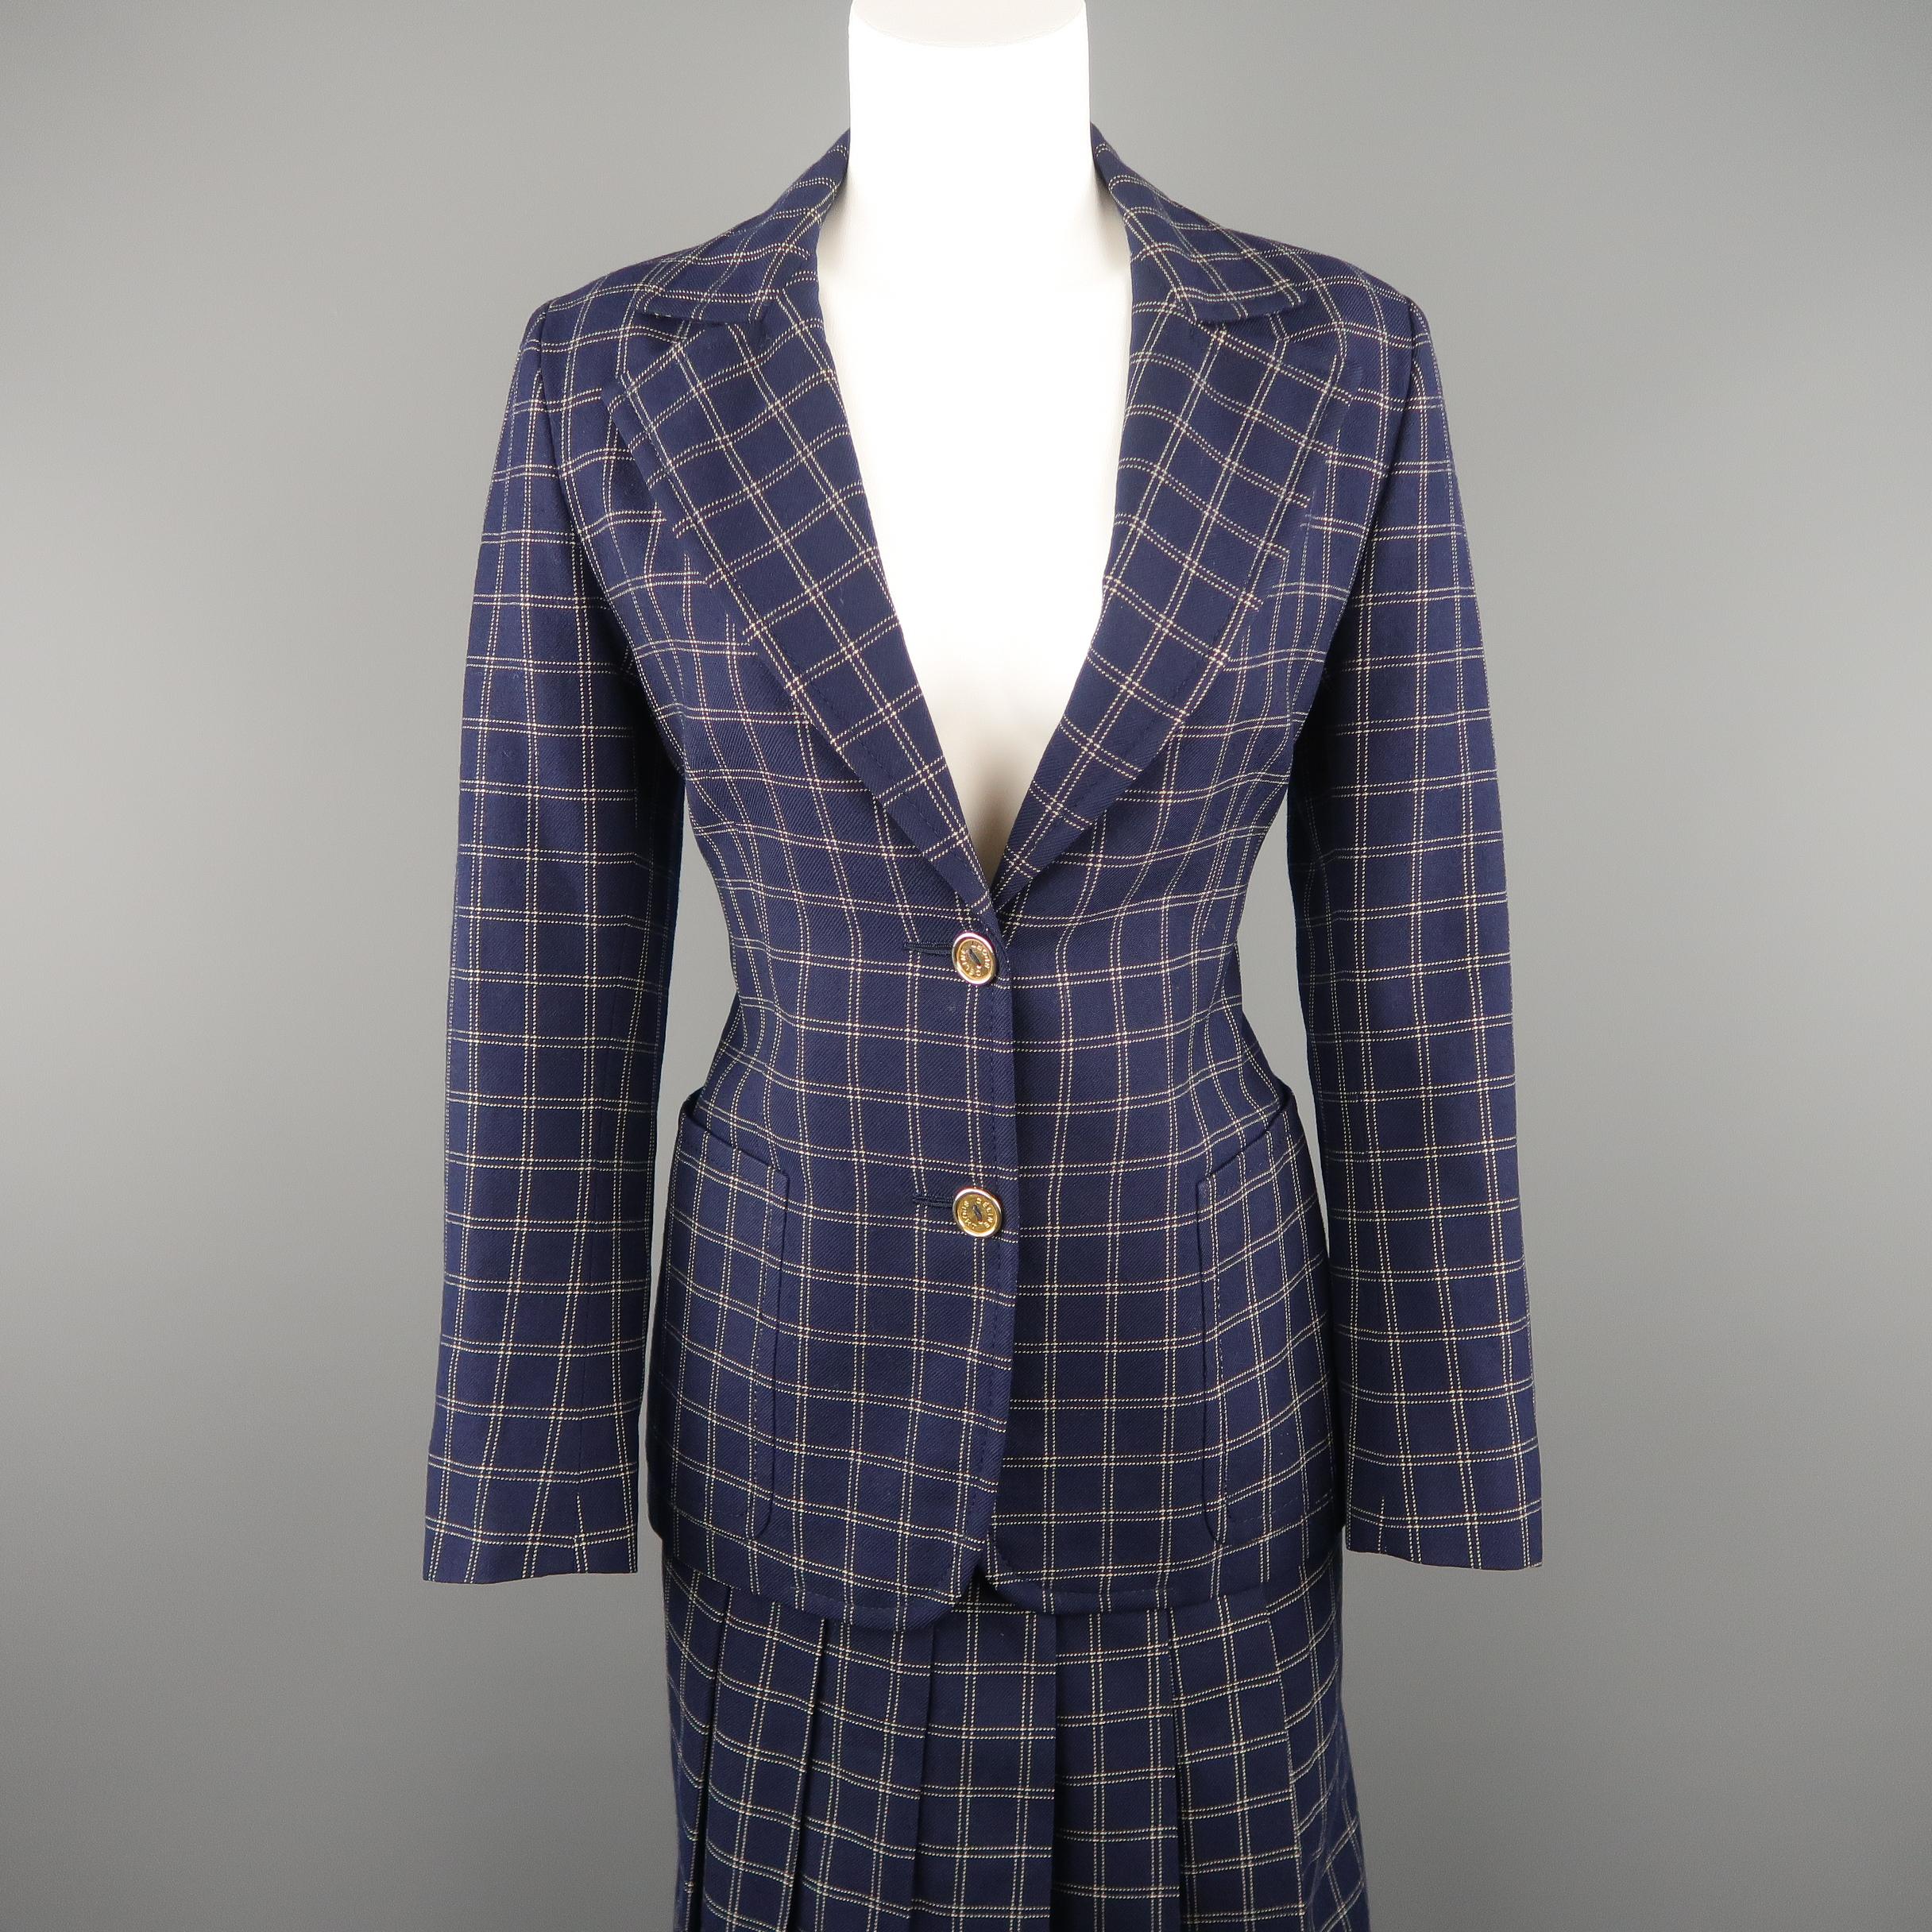 This rare vintage CELINE suit comes in navy and white windowpane grid print wool twill and includes a single breasted blazer with 2 gold tone logo button frontal closure, notch lapel, and patch pockets with a matching box pleated skirt accented with